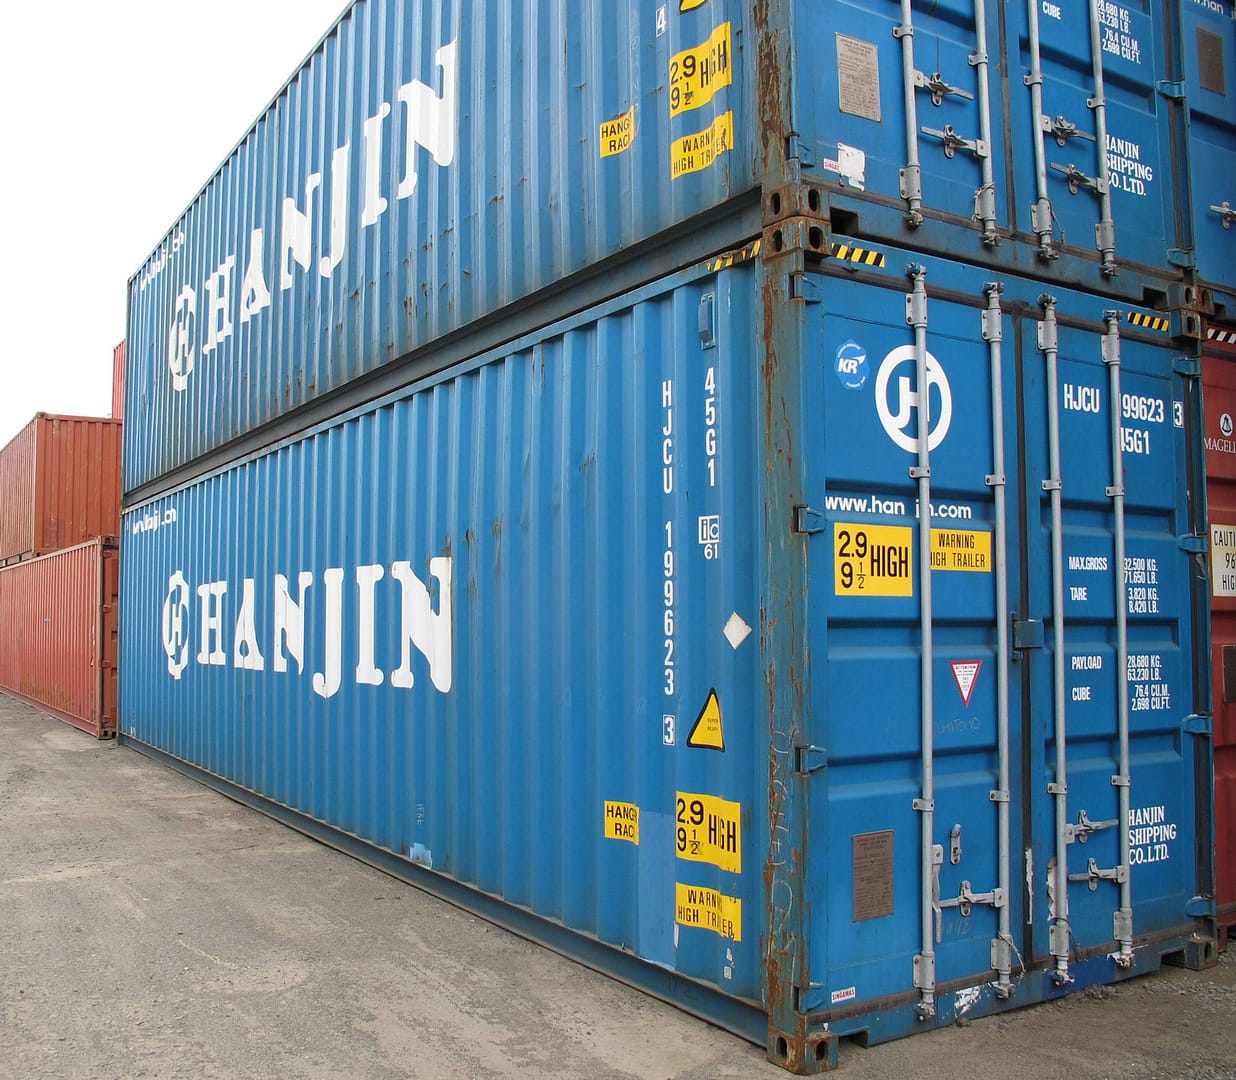 TRS stocks new and used 40ft long highcube shipping storage containers